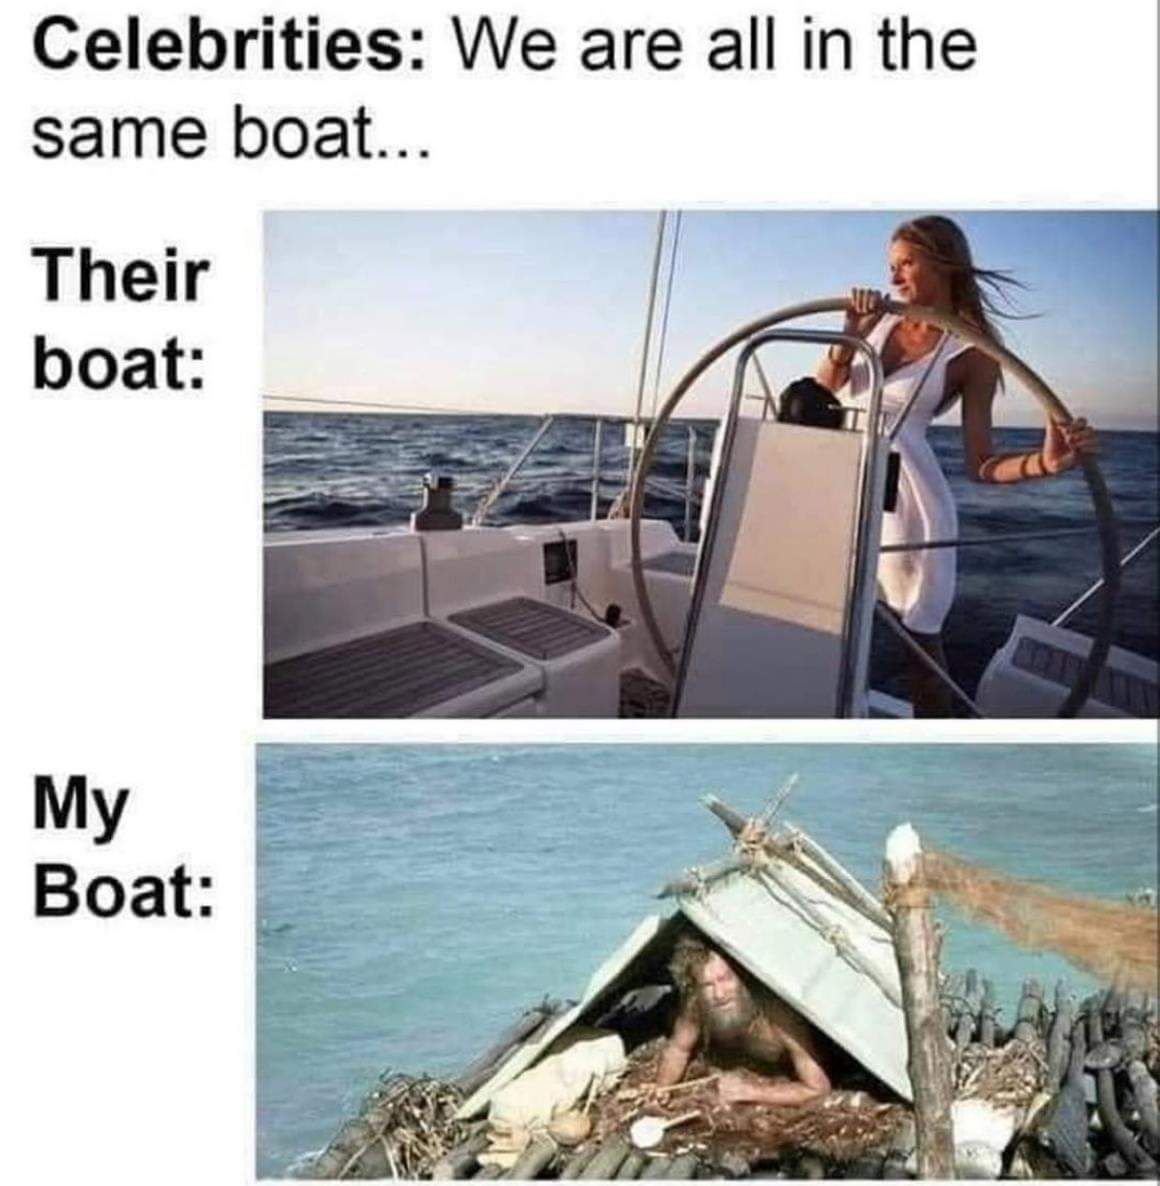 We Are All in the Same Boat